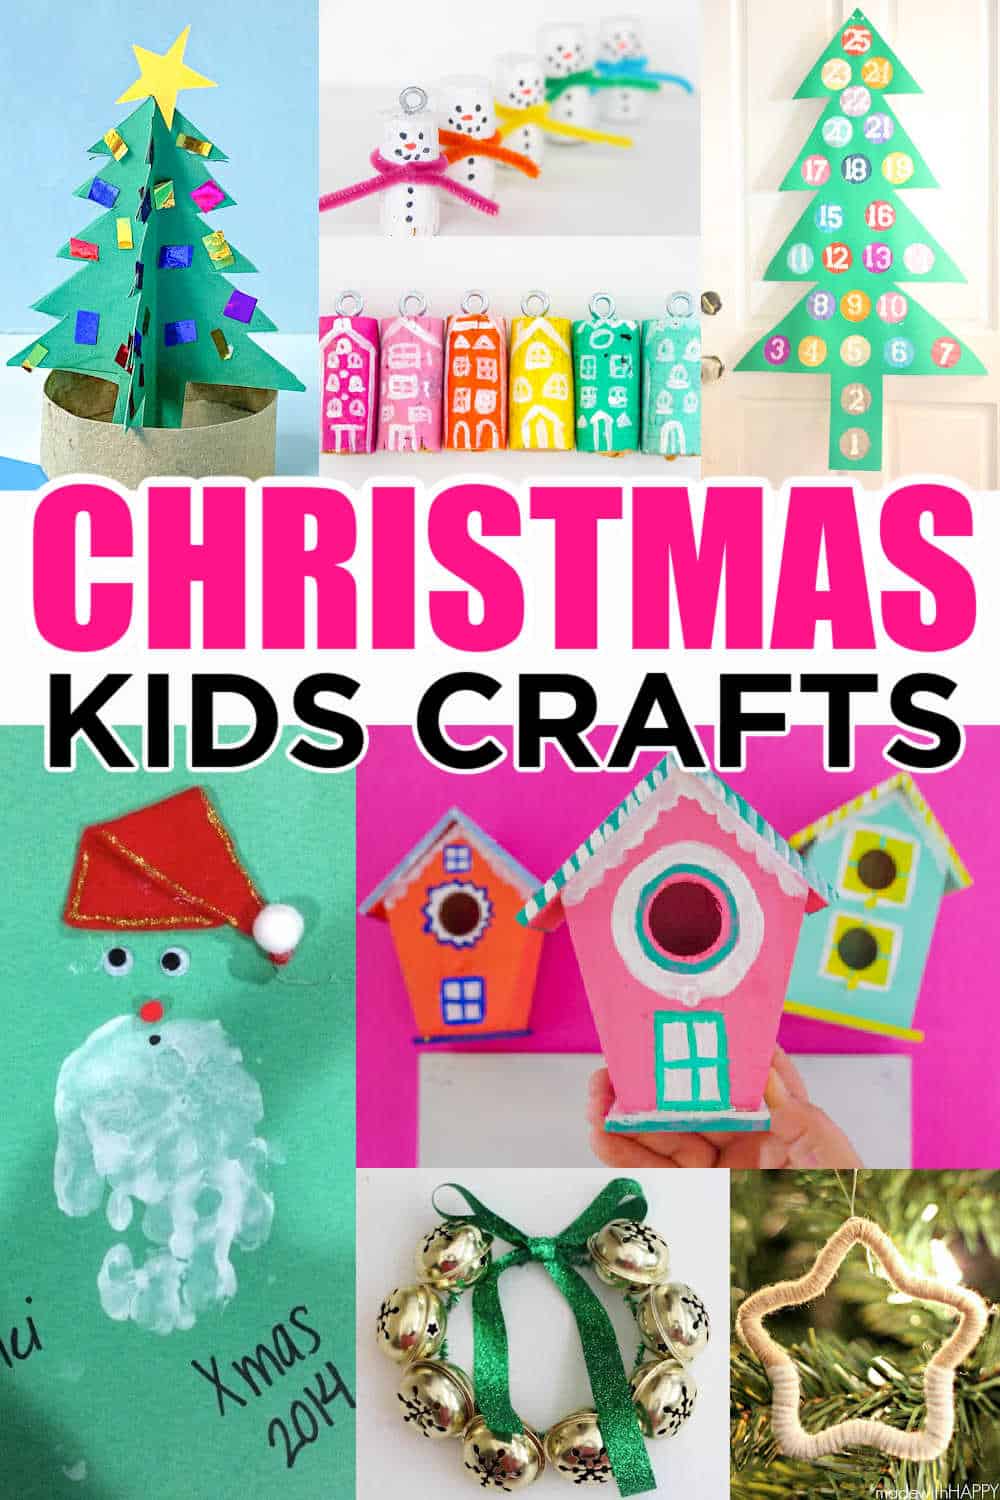 50+ Easy Crafts for Adults: No Crafting Skills Required! - DIY Candy